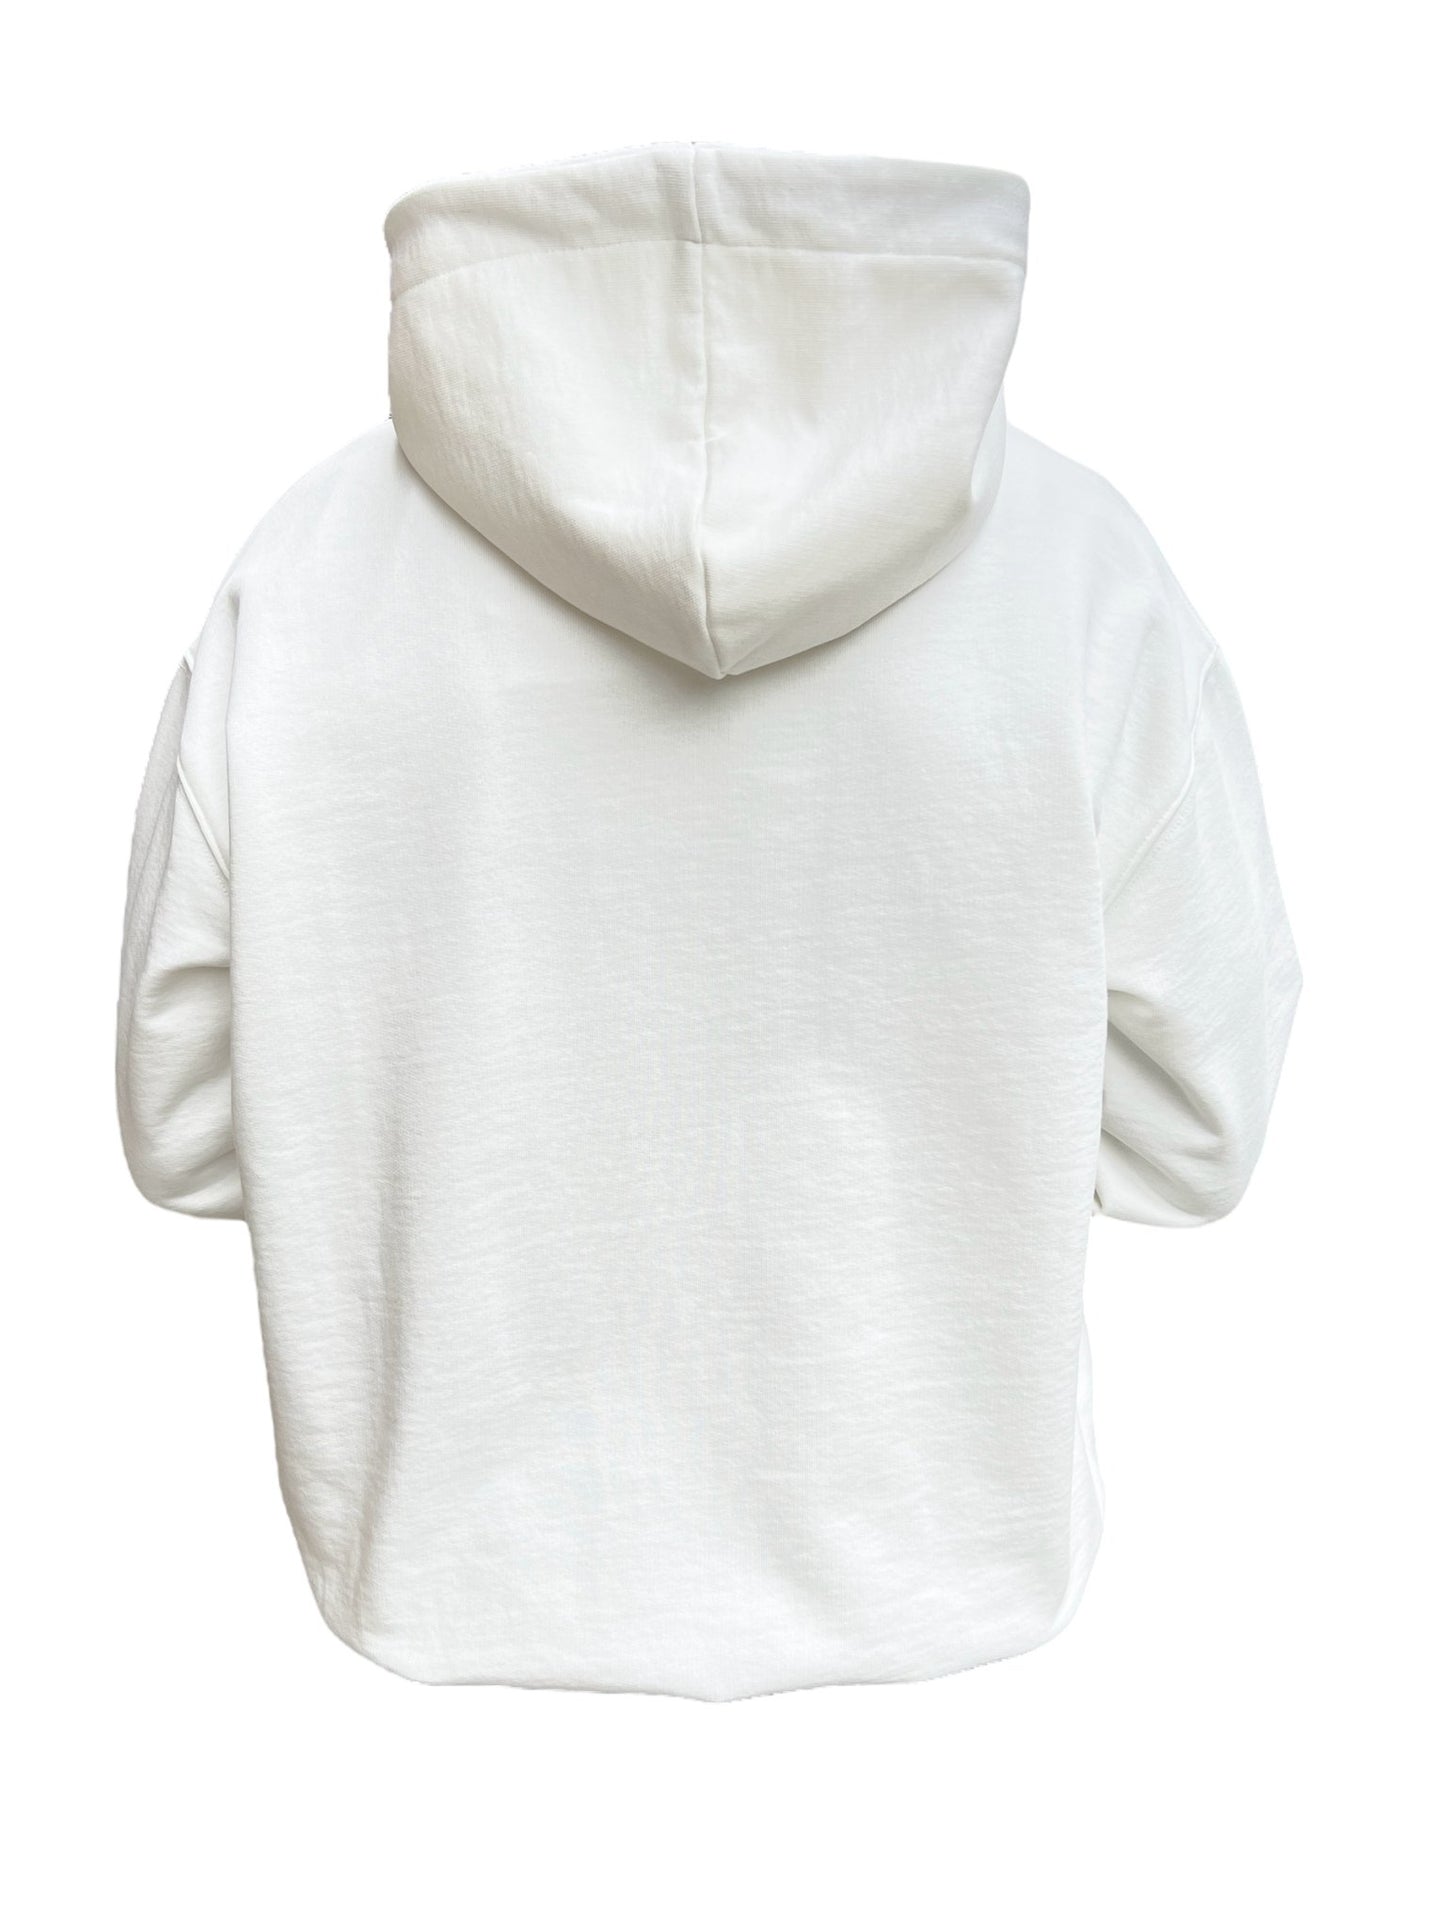 White FAMILY FIRST HS2402 HOODIE SYMBOL hoodie on a mannequin with the hood up, displayed against a plain black background.